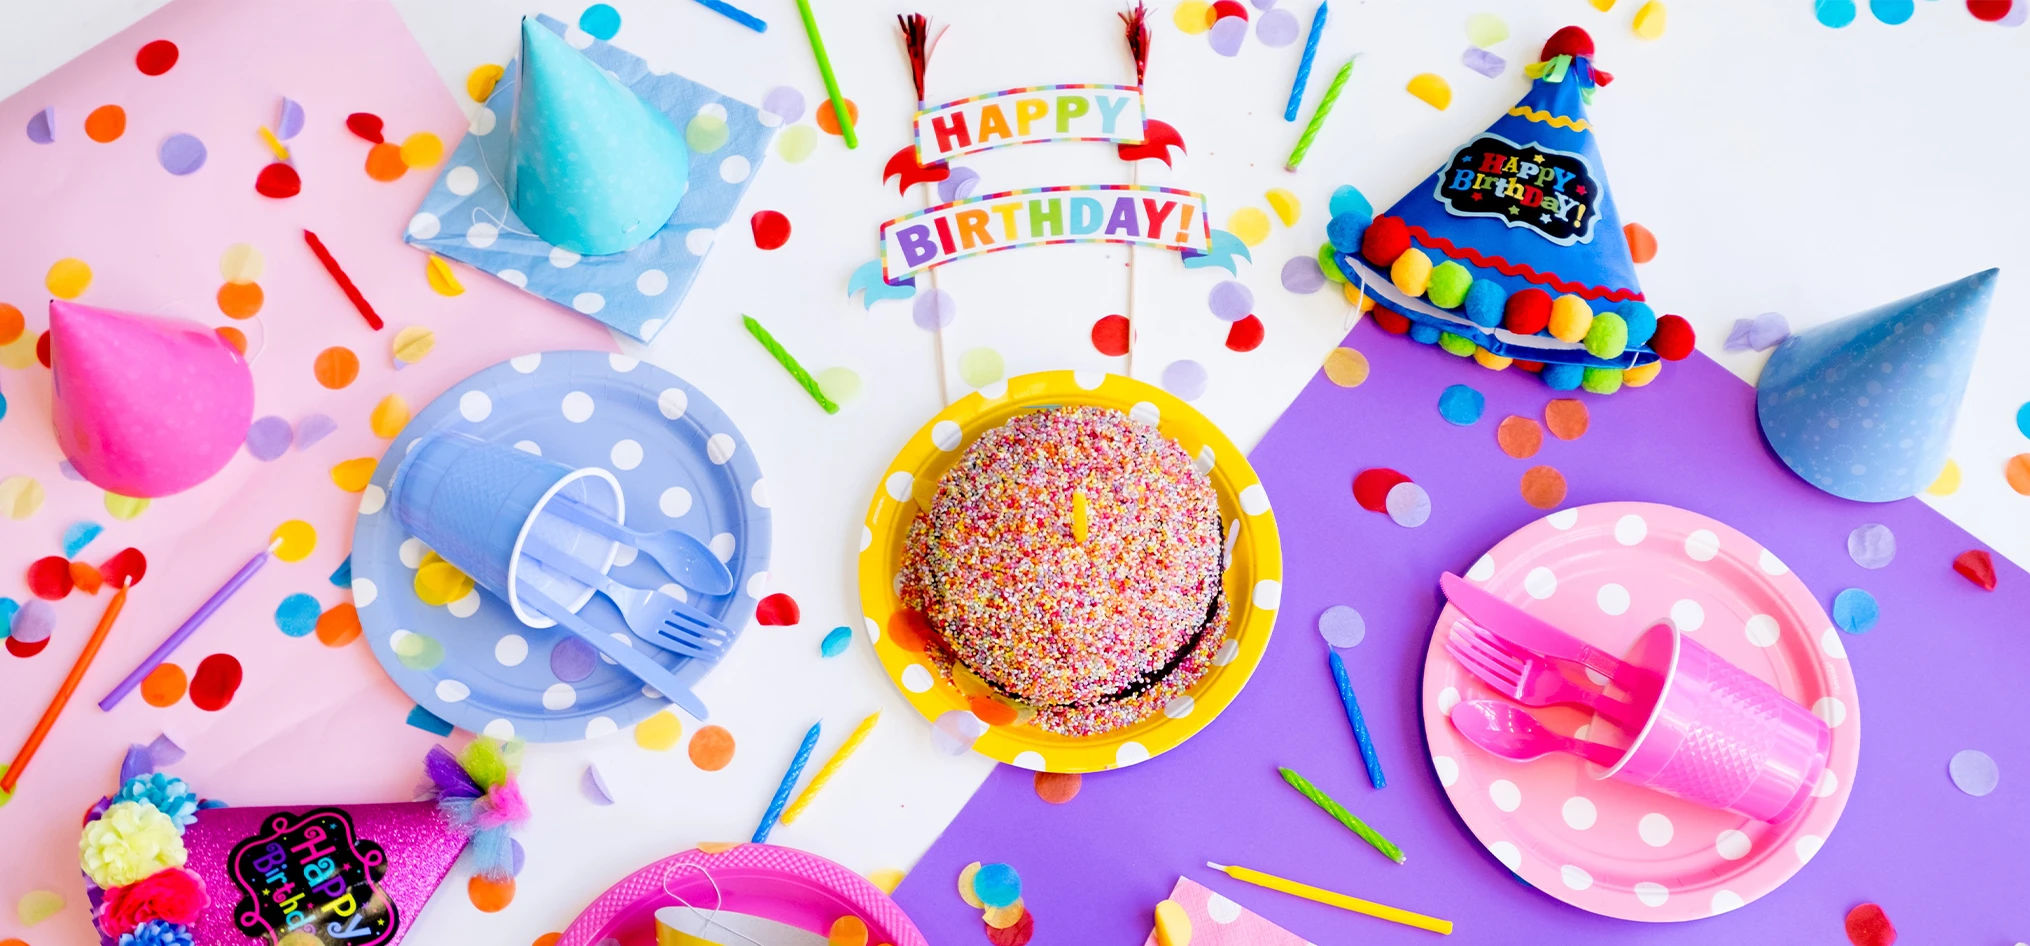 How to Plan a Surprise Birthday Party!